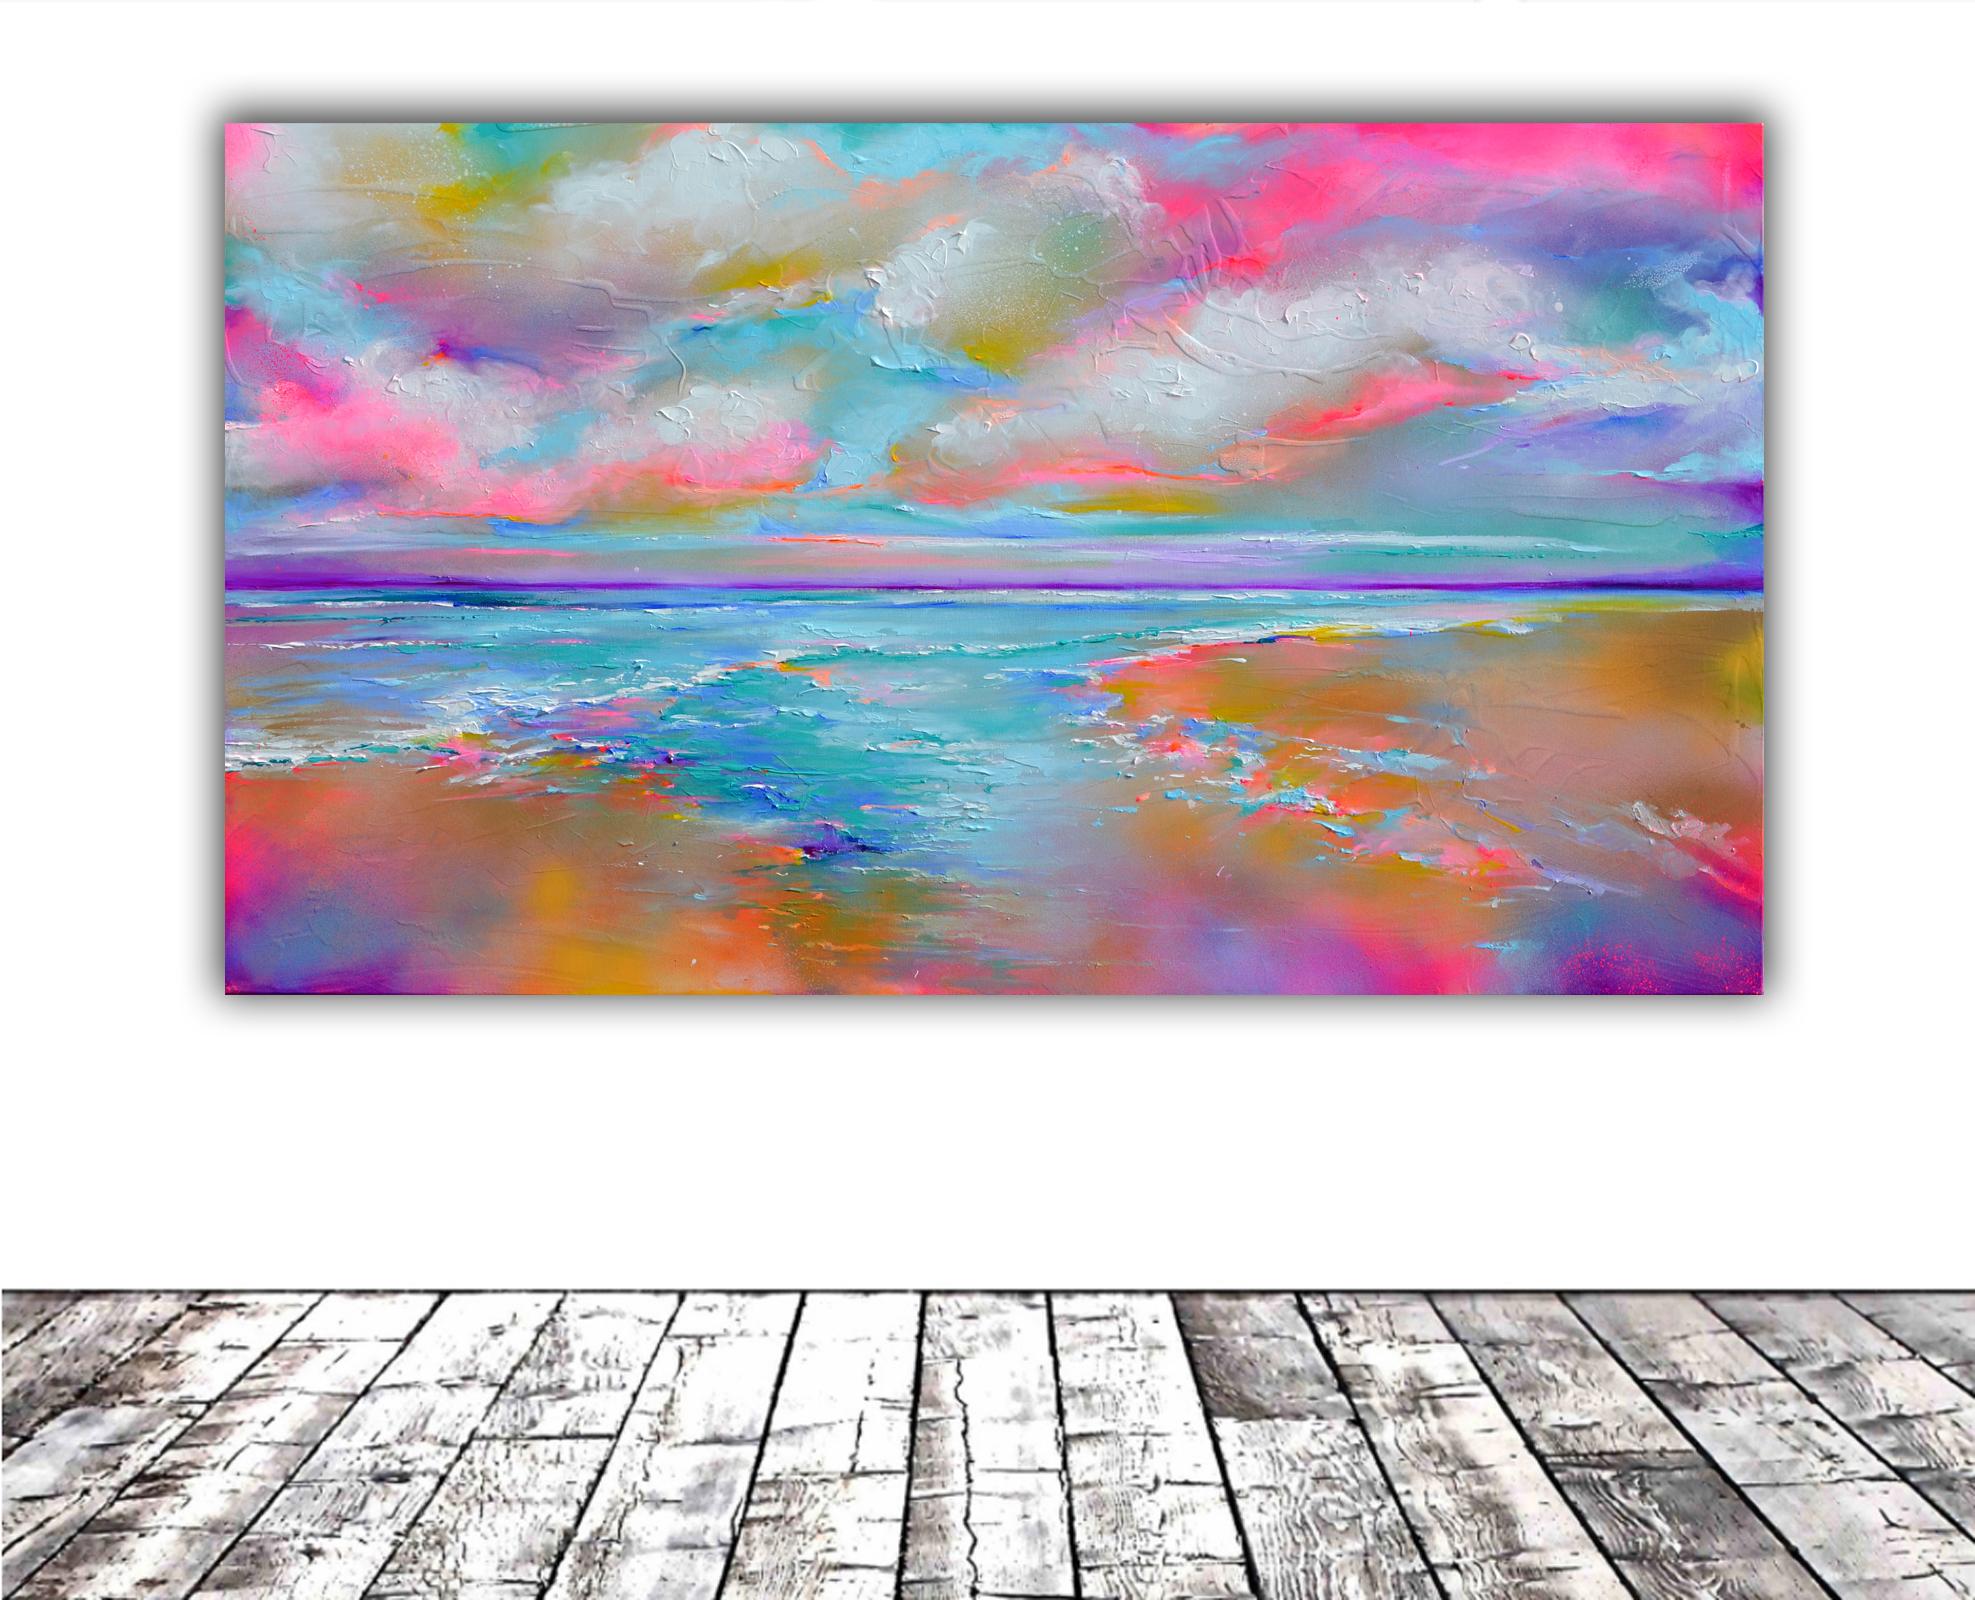 READY TO HANG - GALLERY QUALITY

A beautiful modern seascape, abstract, made with professional varnished acrylics and Amsterdam acrylic sprays on stretched heavy canvas.

I ship this marvellous artwork ready to hang.

Dimensions: 140X80X4 cm -